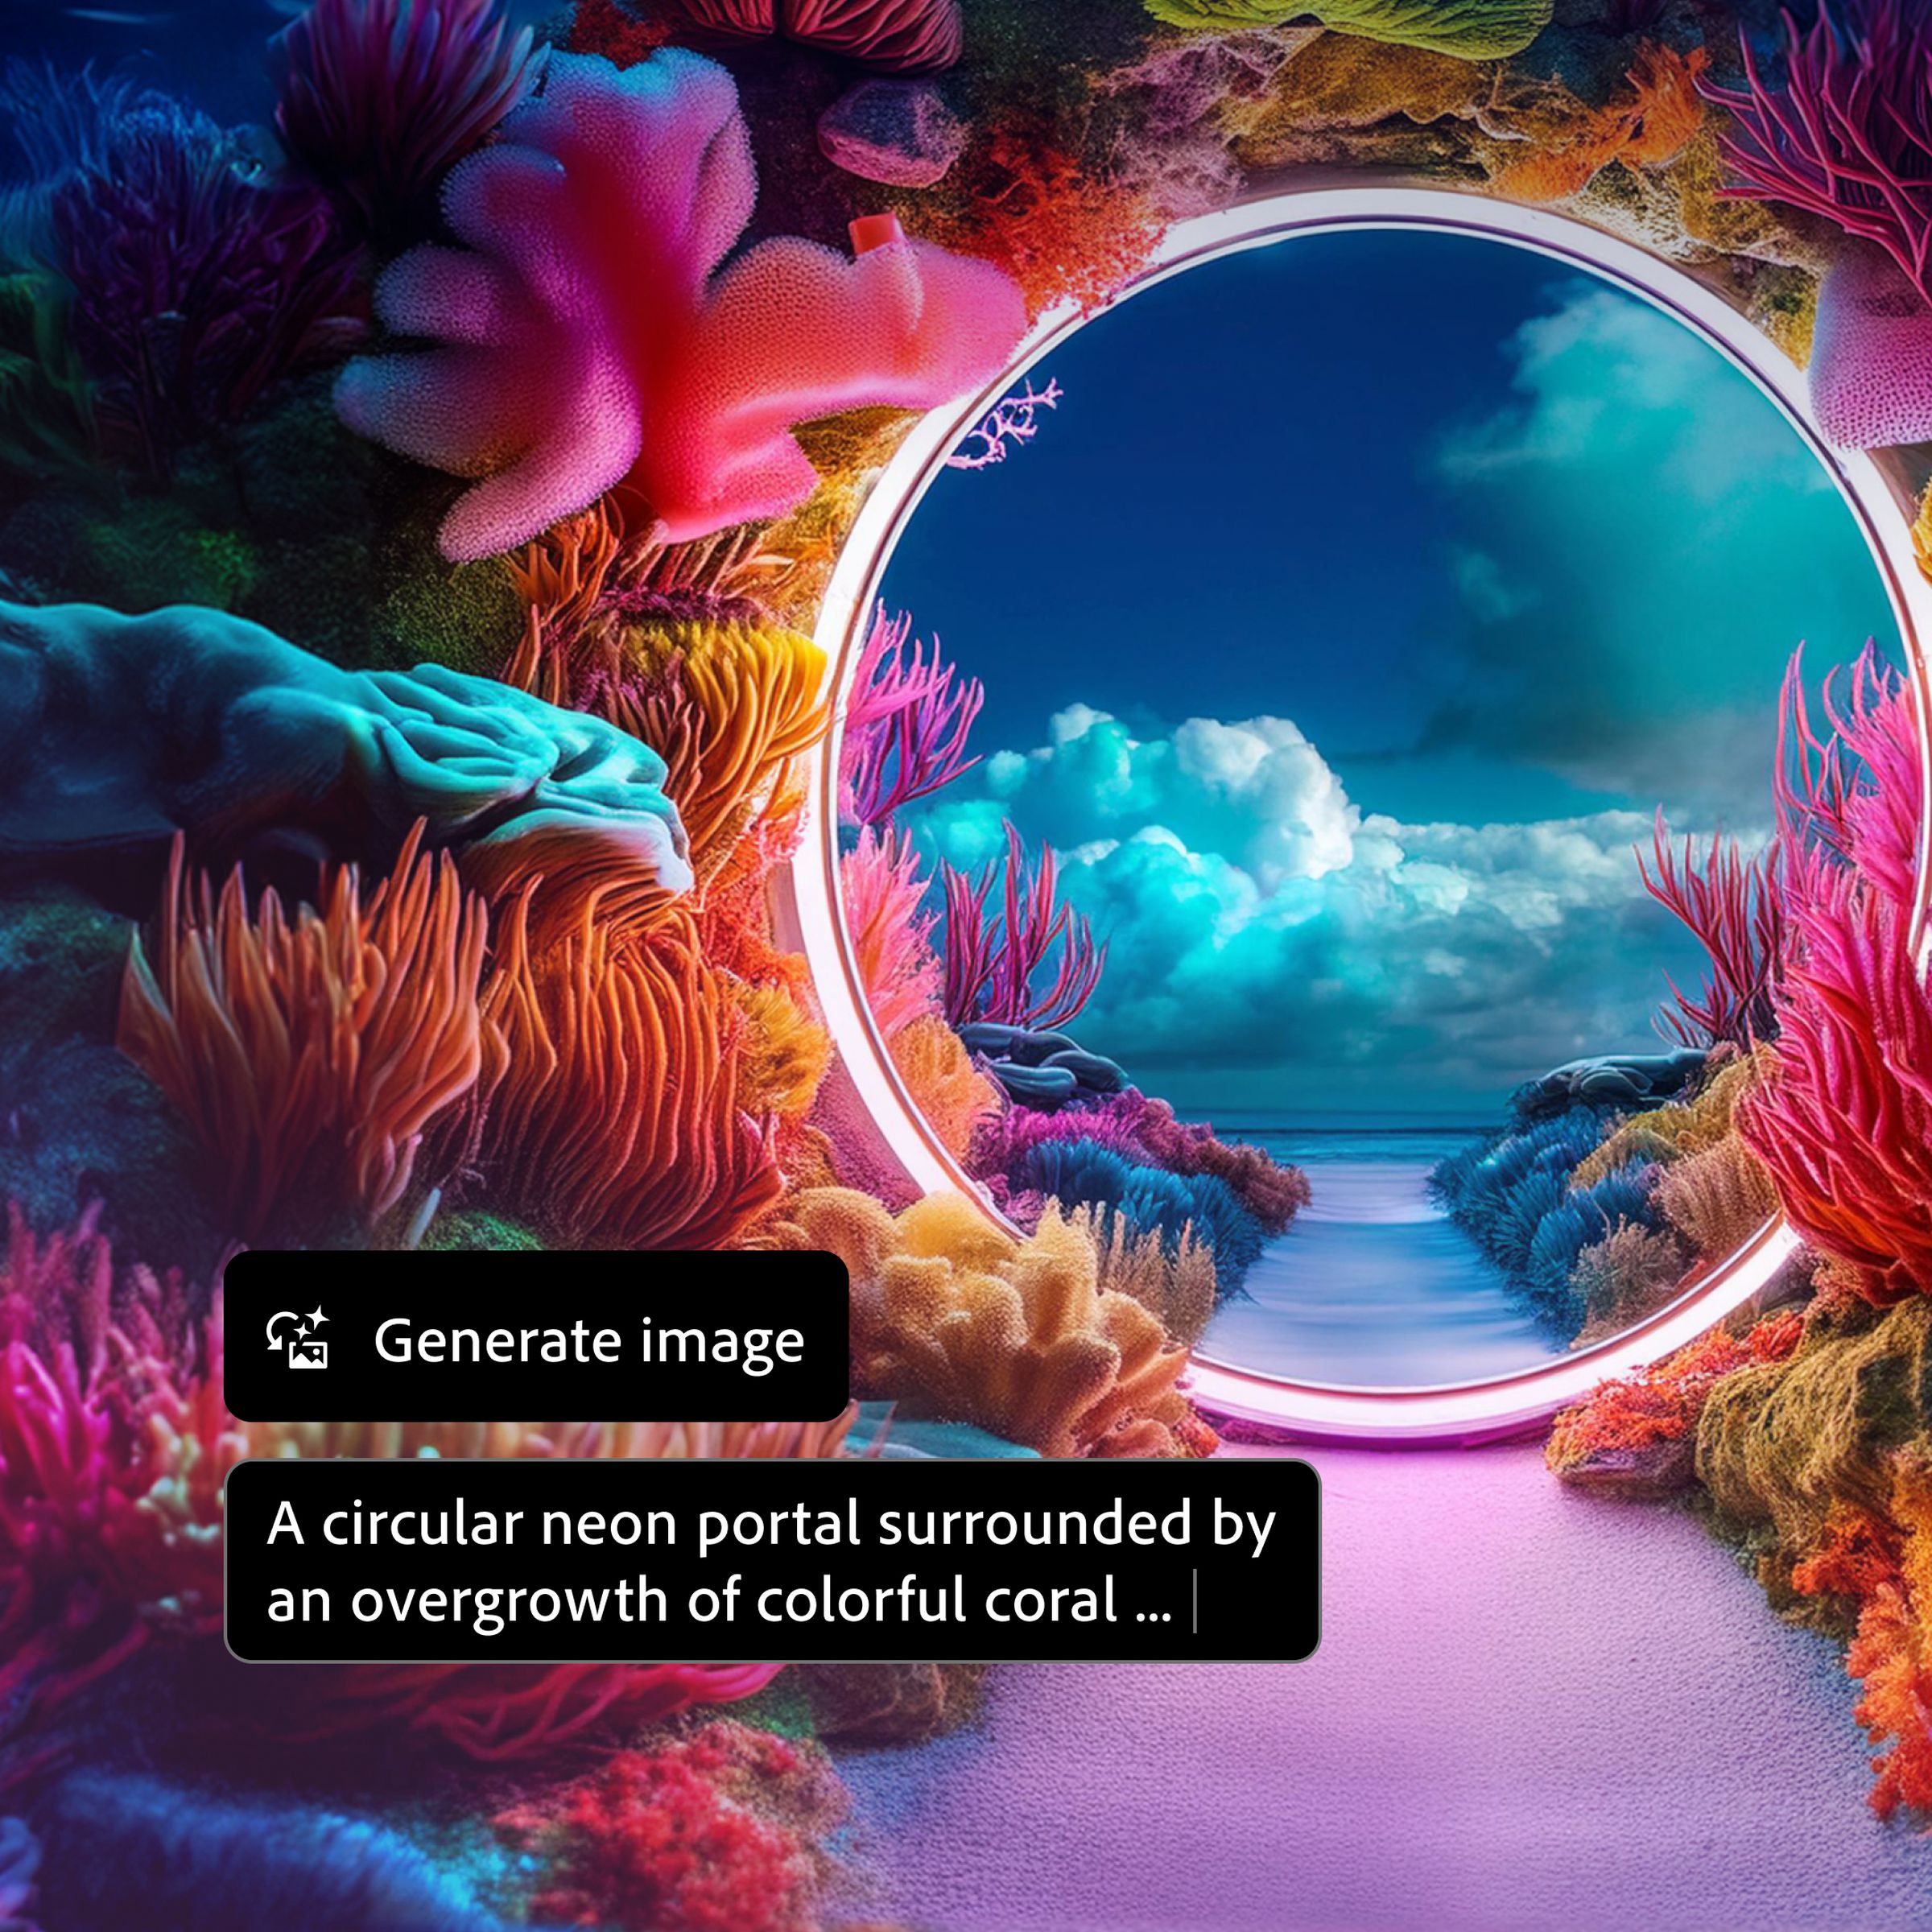 An image showing an example of Photoshop’s new Generate Image feature.